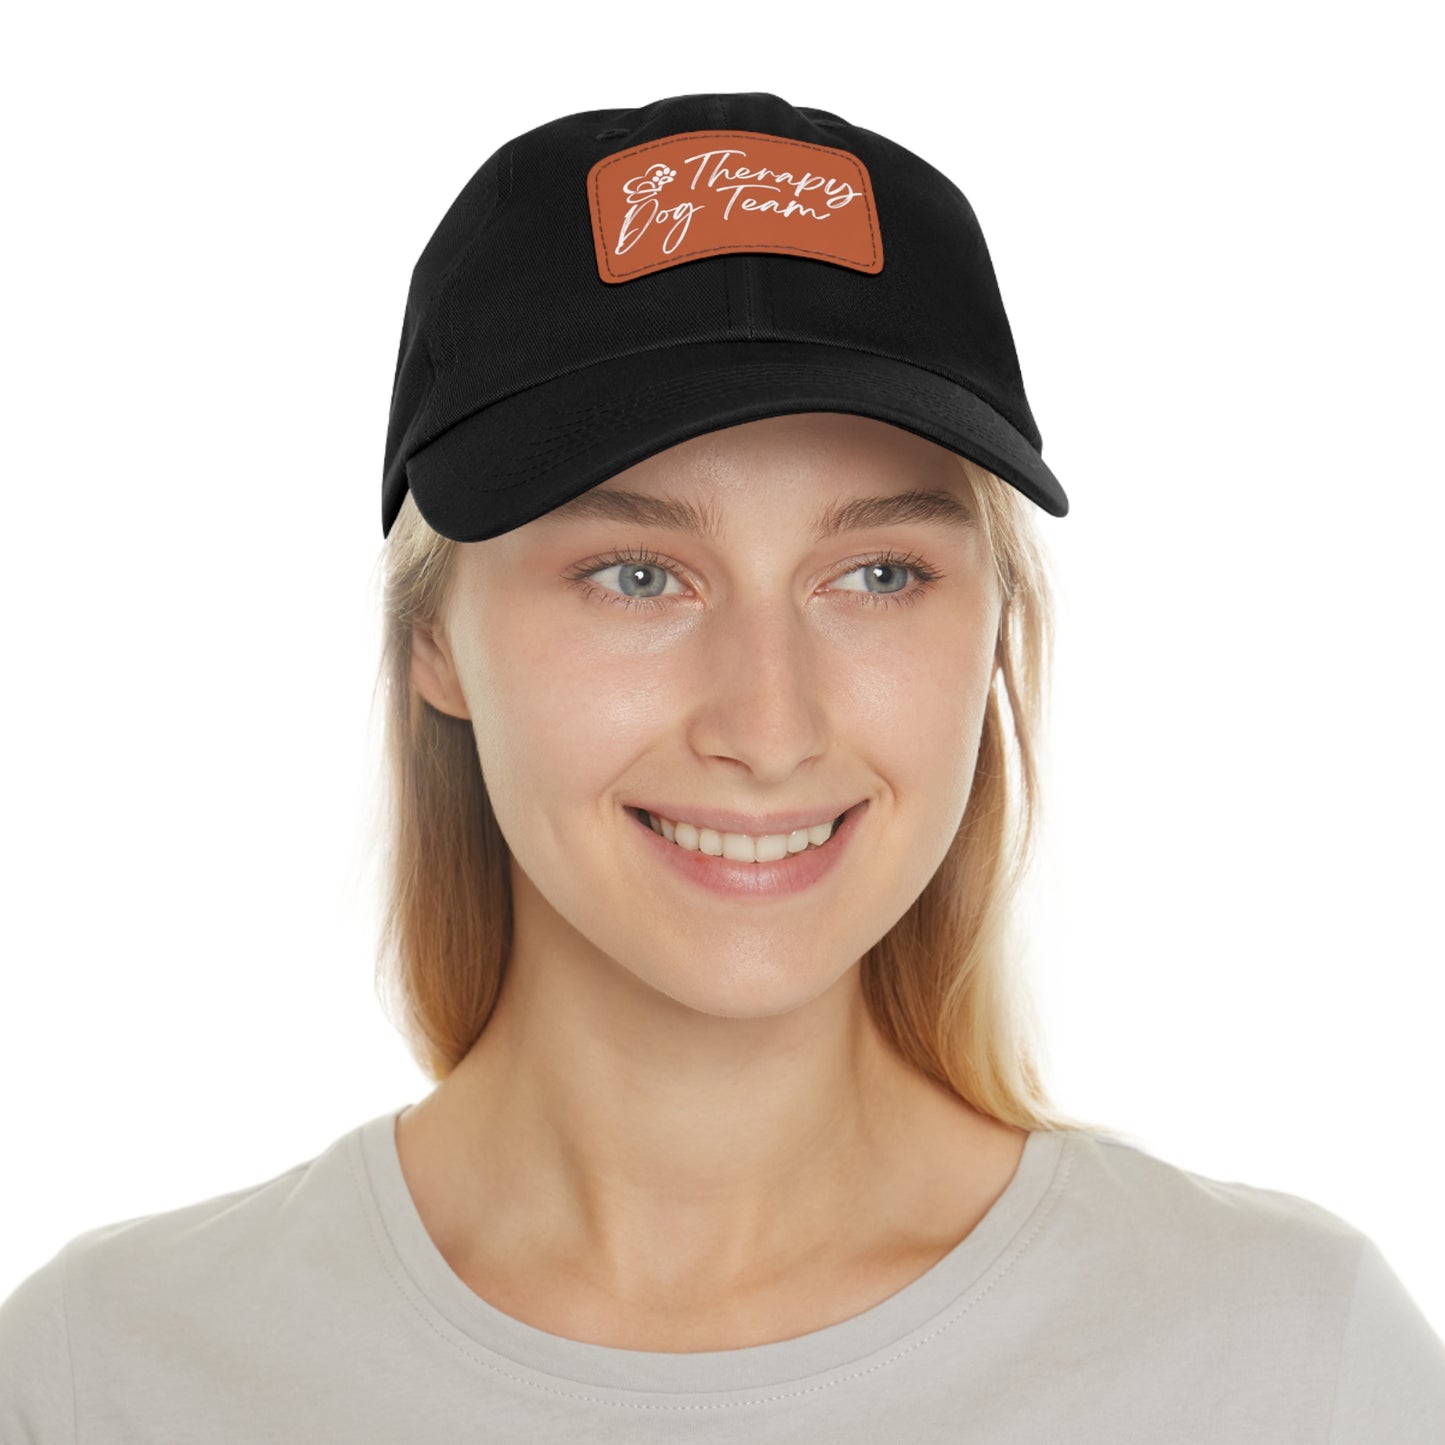 THERAPY DOG TEAM  Hat with Leather Patch (Rectangle)